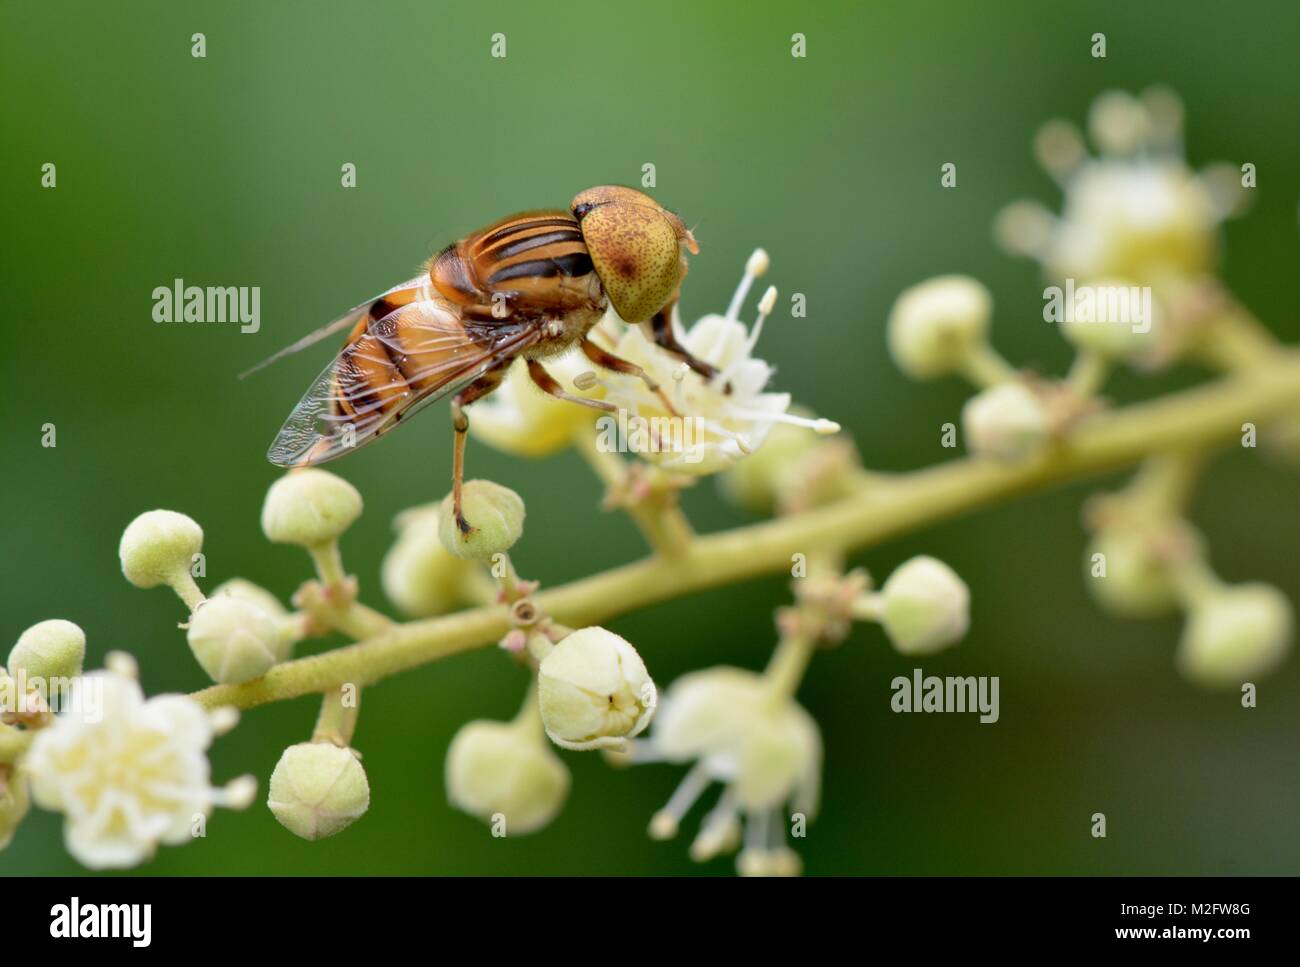 Tropical hoverfly Stock Photo